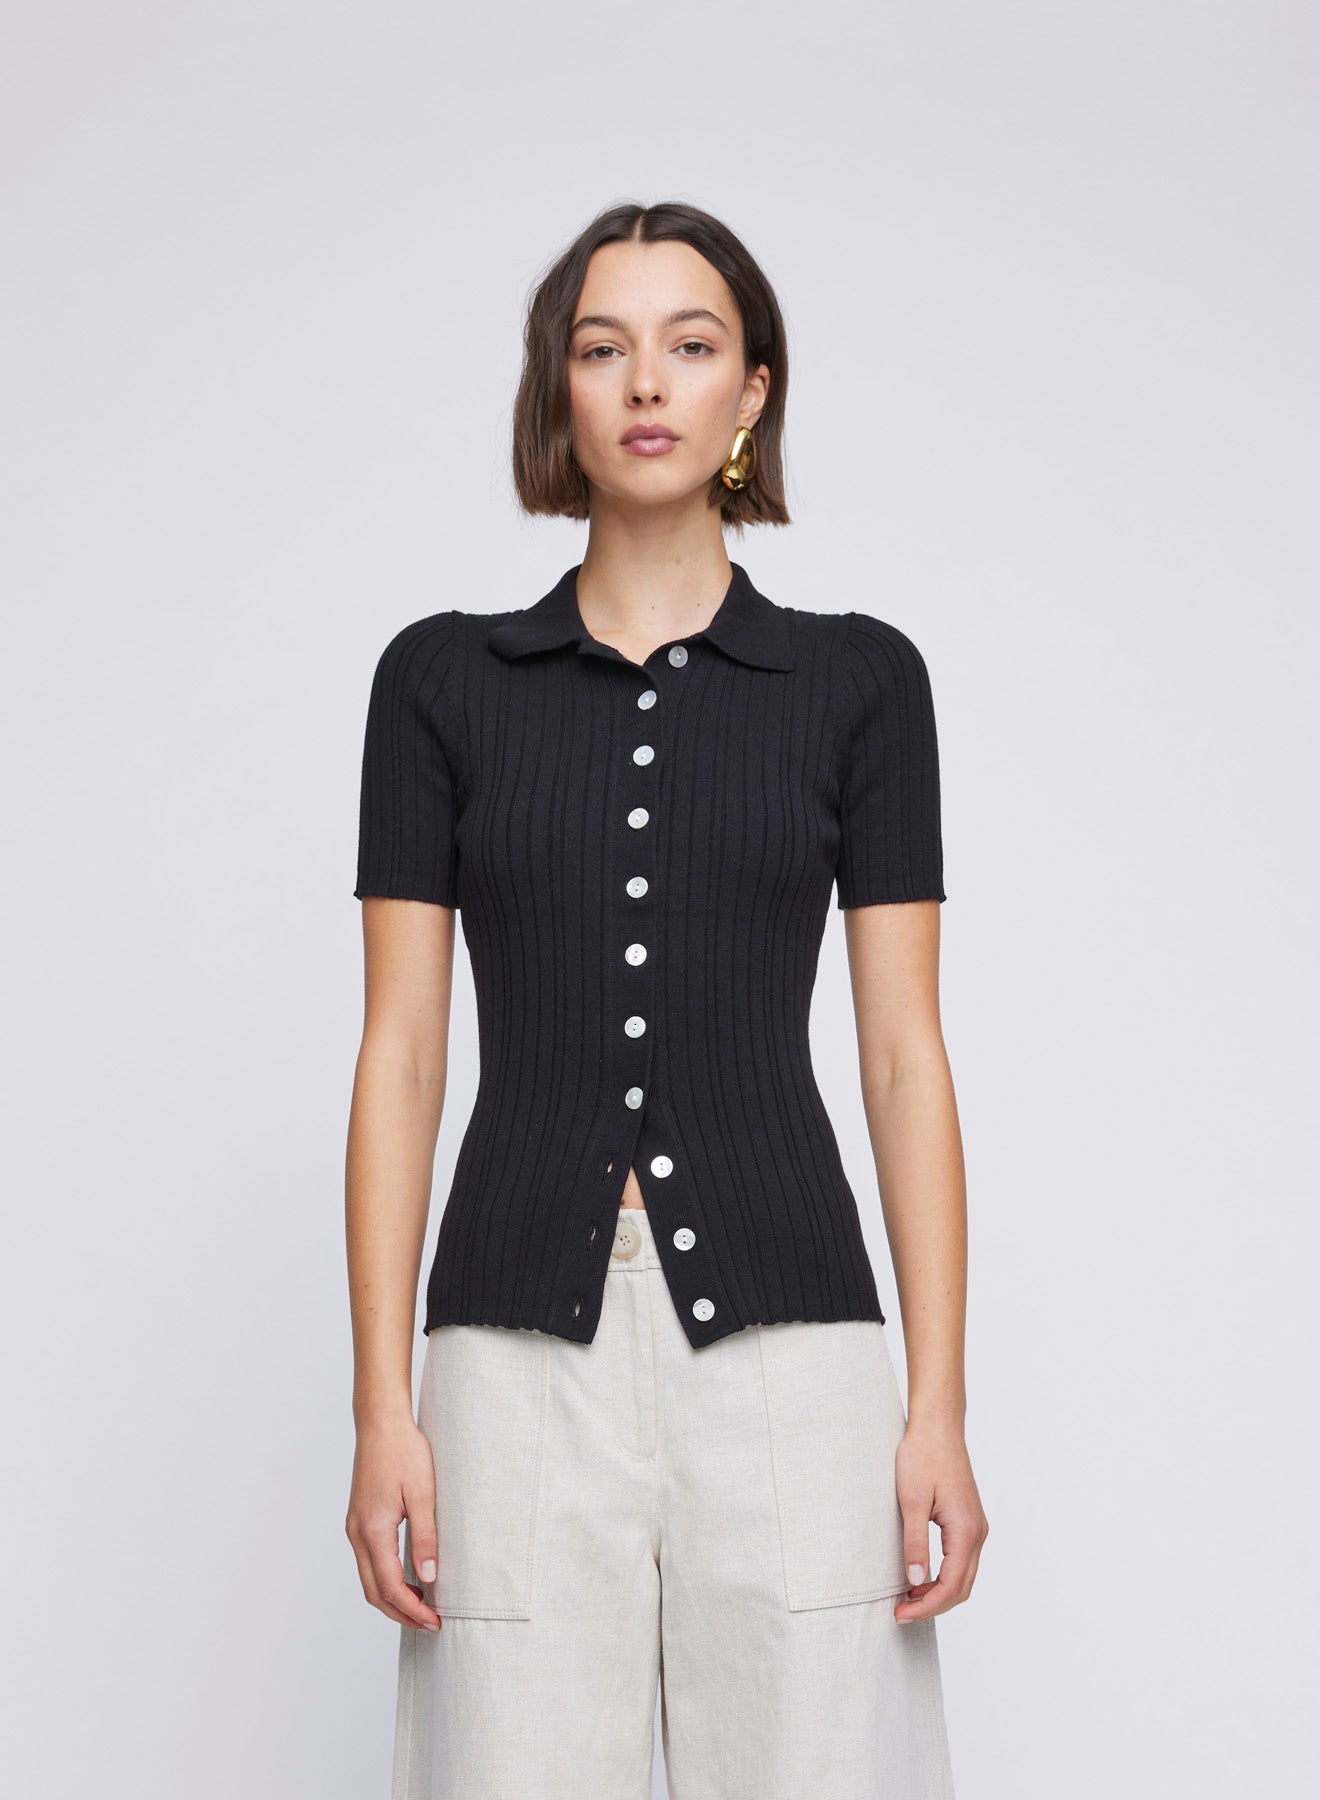 Rib knit short sleeve polo top top with contrast button up. Black knit top, black short sleeve knit top, casual everyday top, casual top, casual knit top.